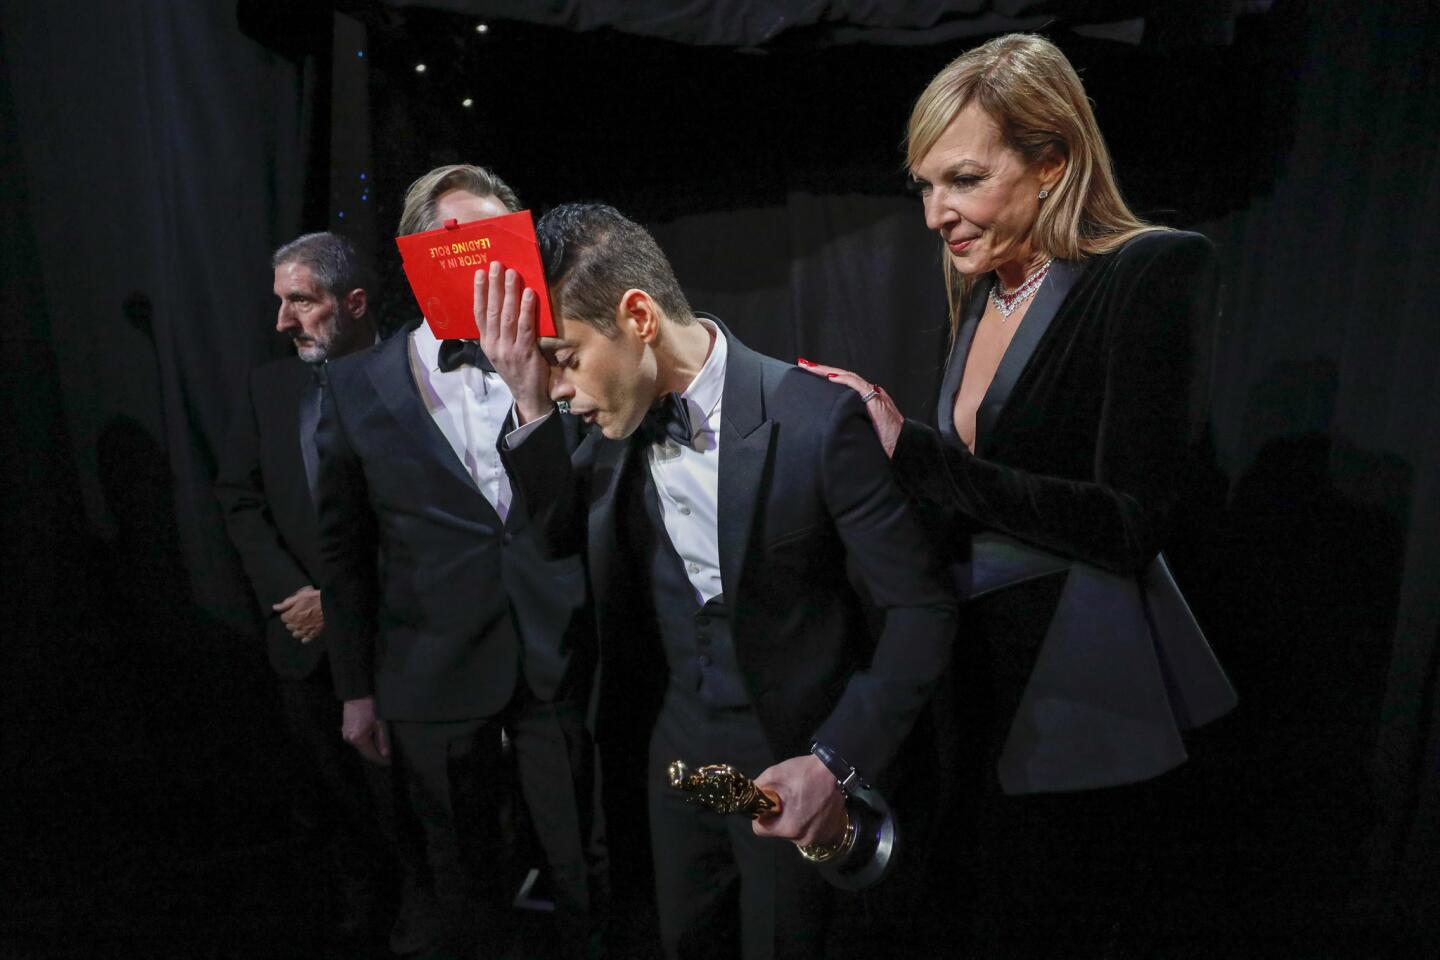 Rami Malek reacts after winning the lead actor award for "Bohemian Rhapsody" backstage at the 91st Academy Awards on Sunday.